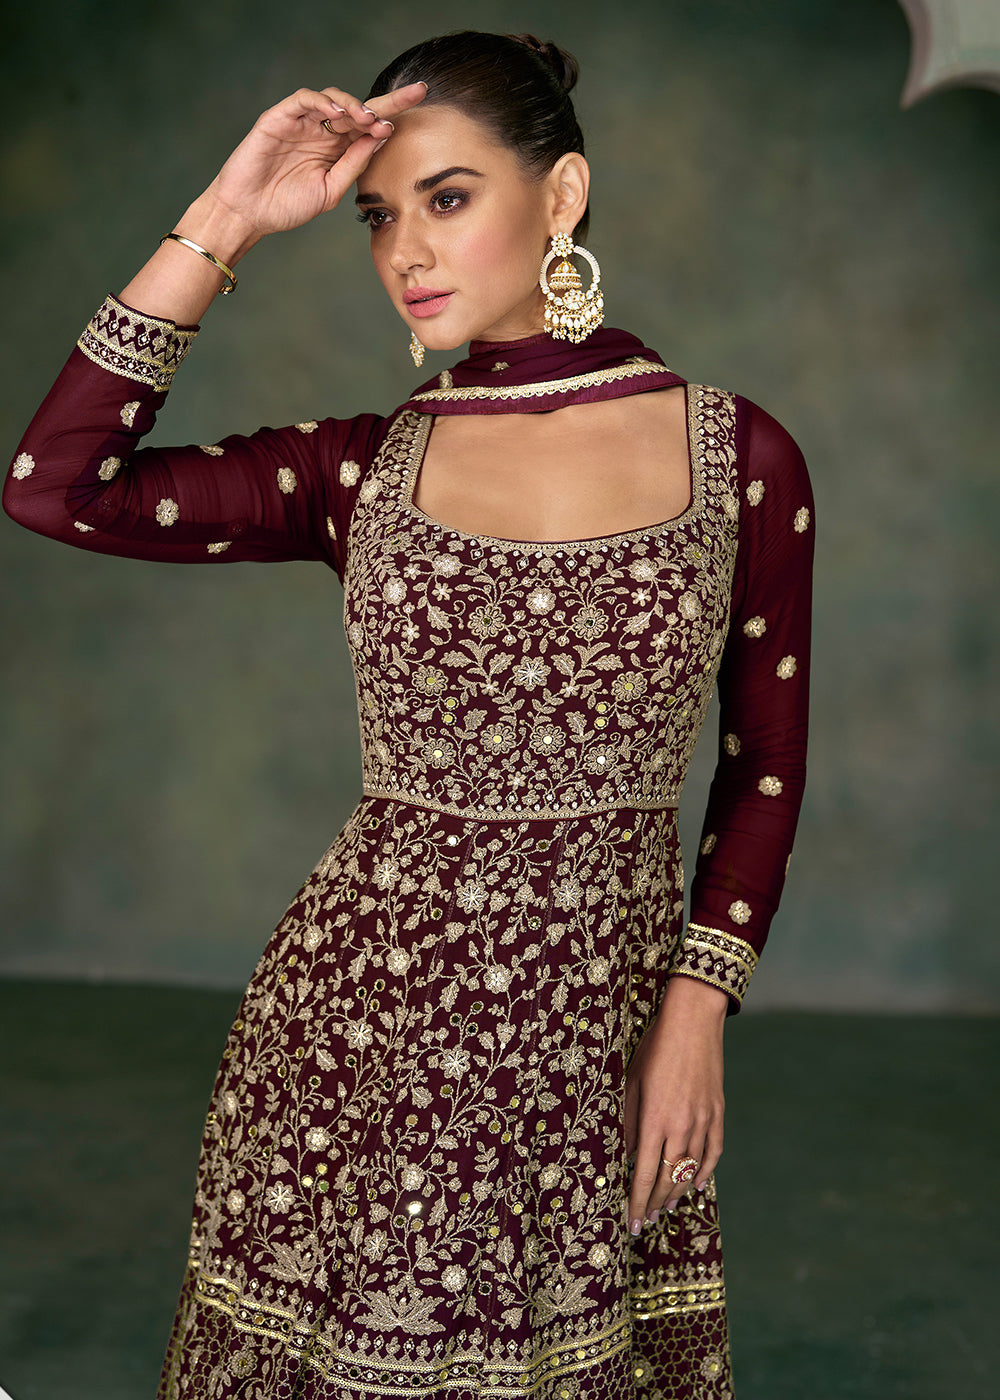 Buy Now Tempting Maroon Georgette Embroidered Wedding Anarkali Suit Online in USA, UK, Australia, New Zealand, Canada & Worldwide at Empress Clothing. 